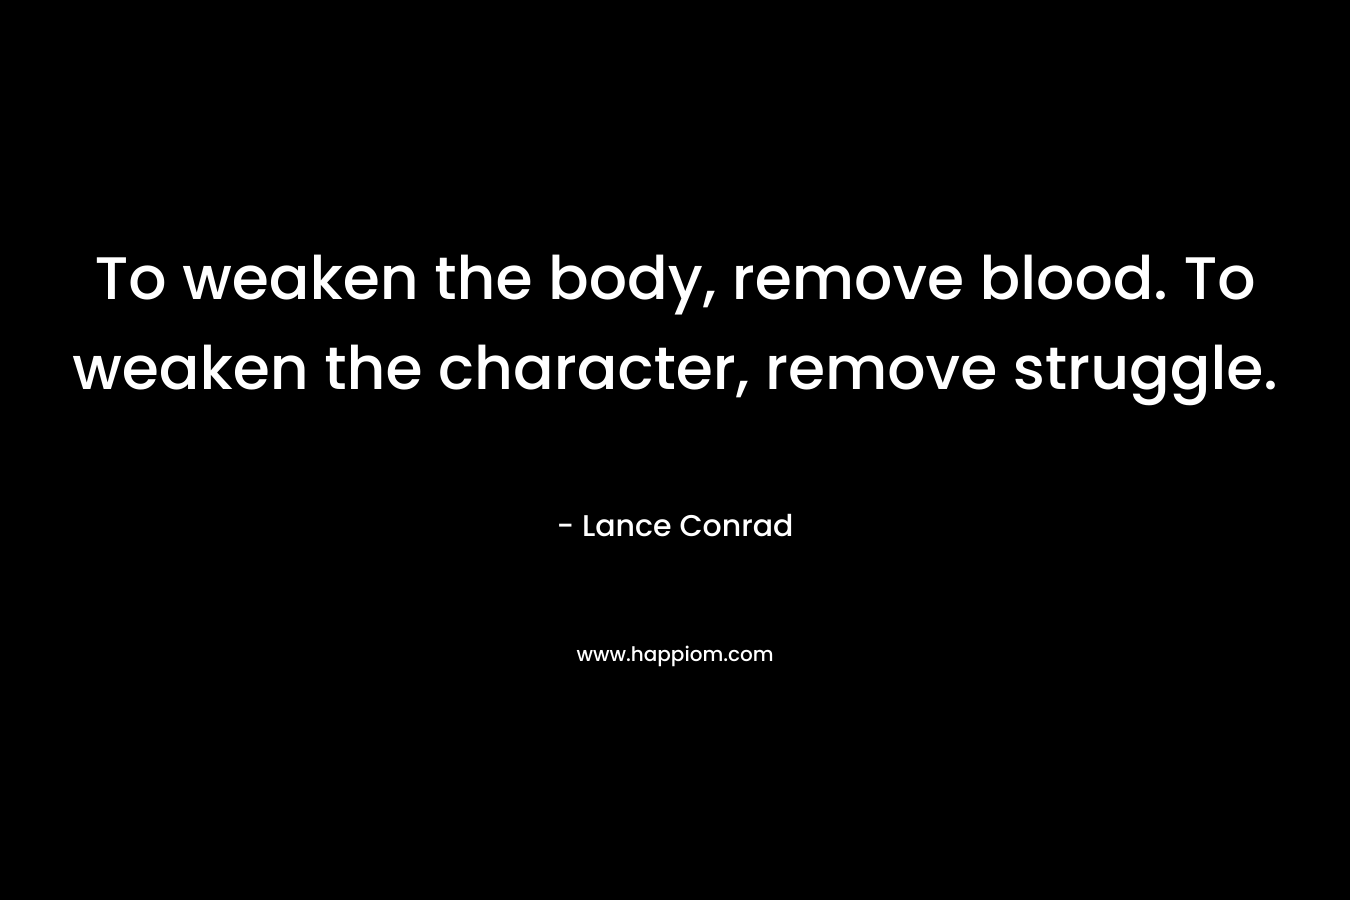 To weaken the body, remove blood. To weaken the character, remove struggle.